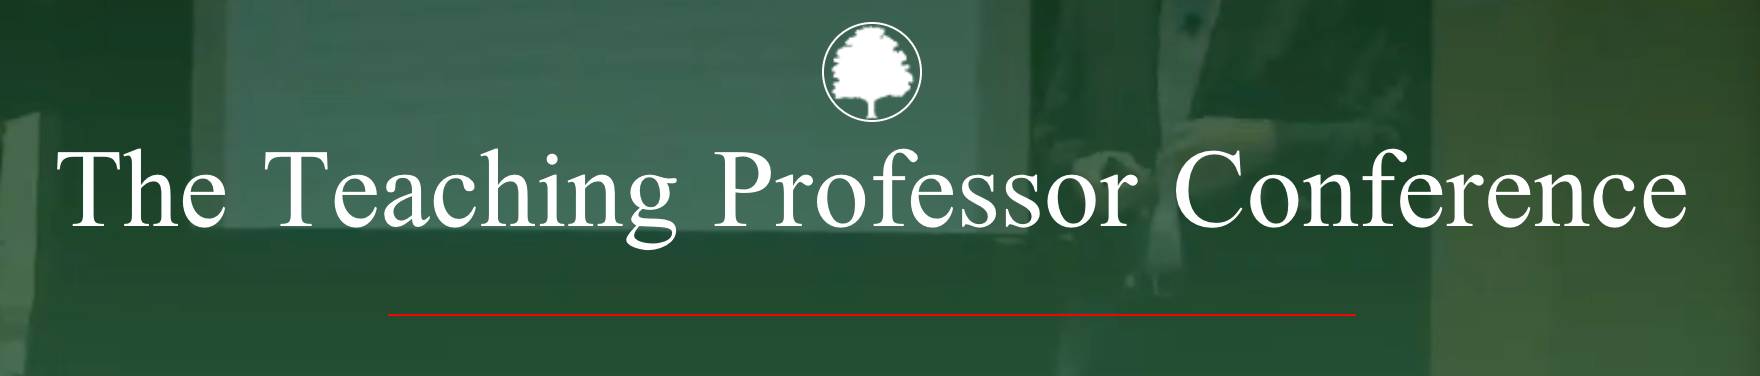 The Teaching Professor Conference Logo